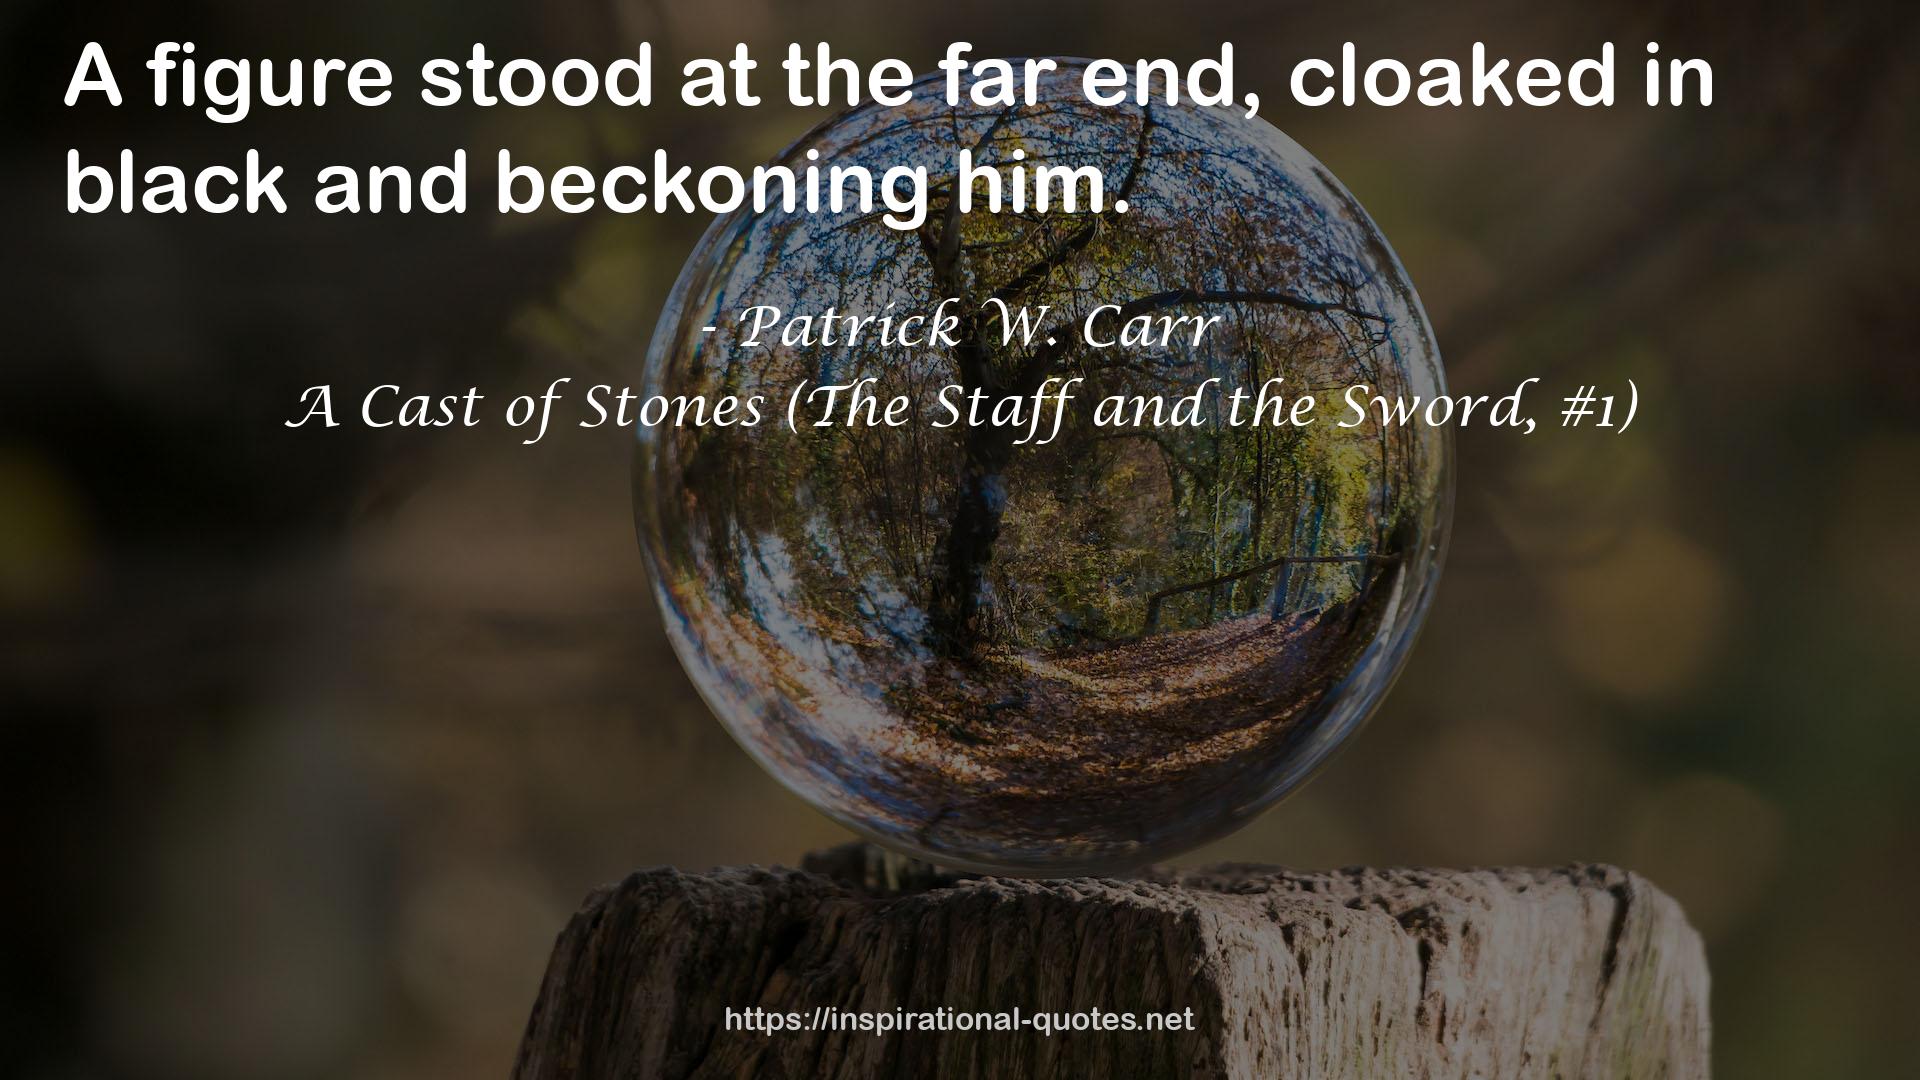 A Cast of Stones (The Staff and the Sword, #1) QUOTES